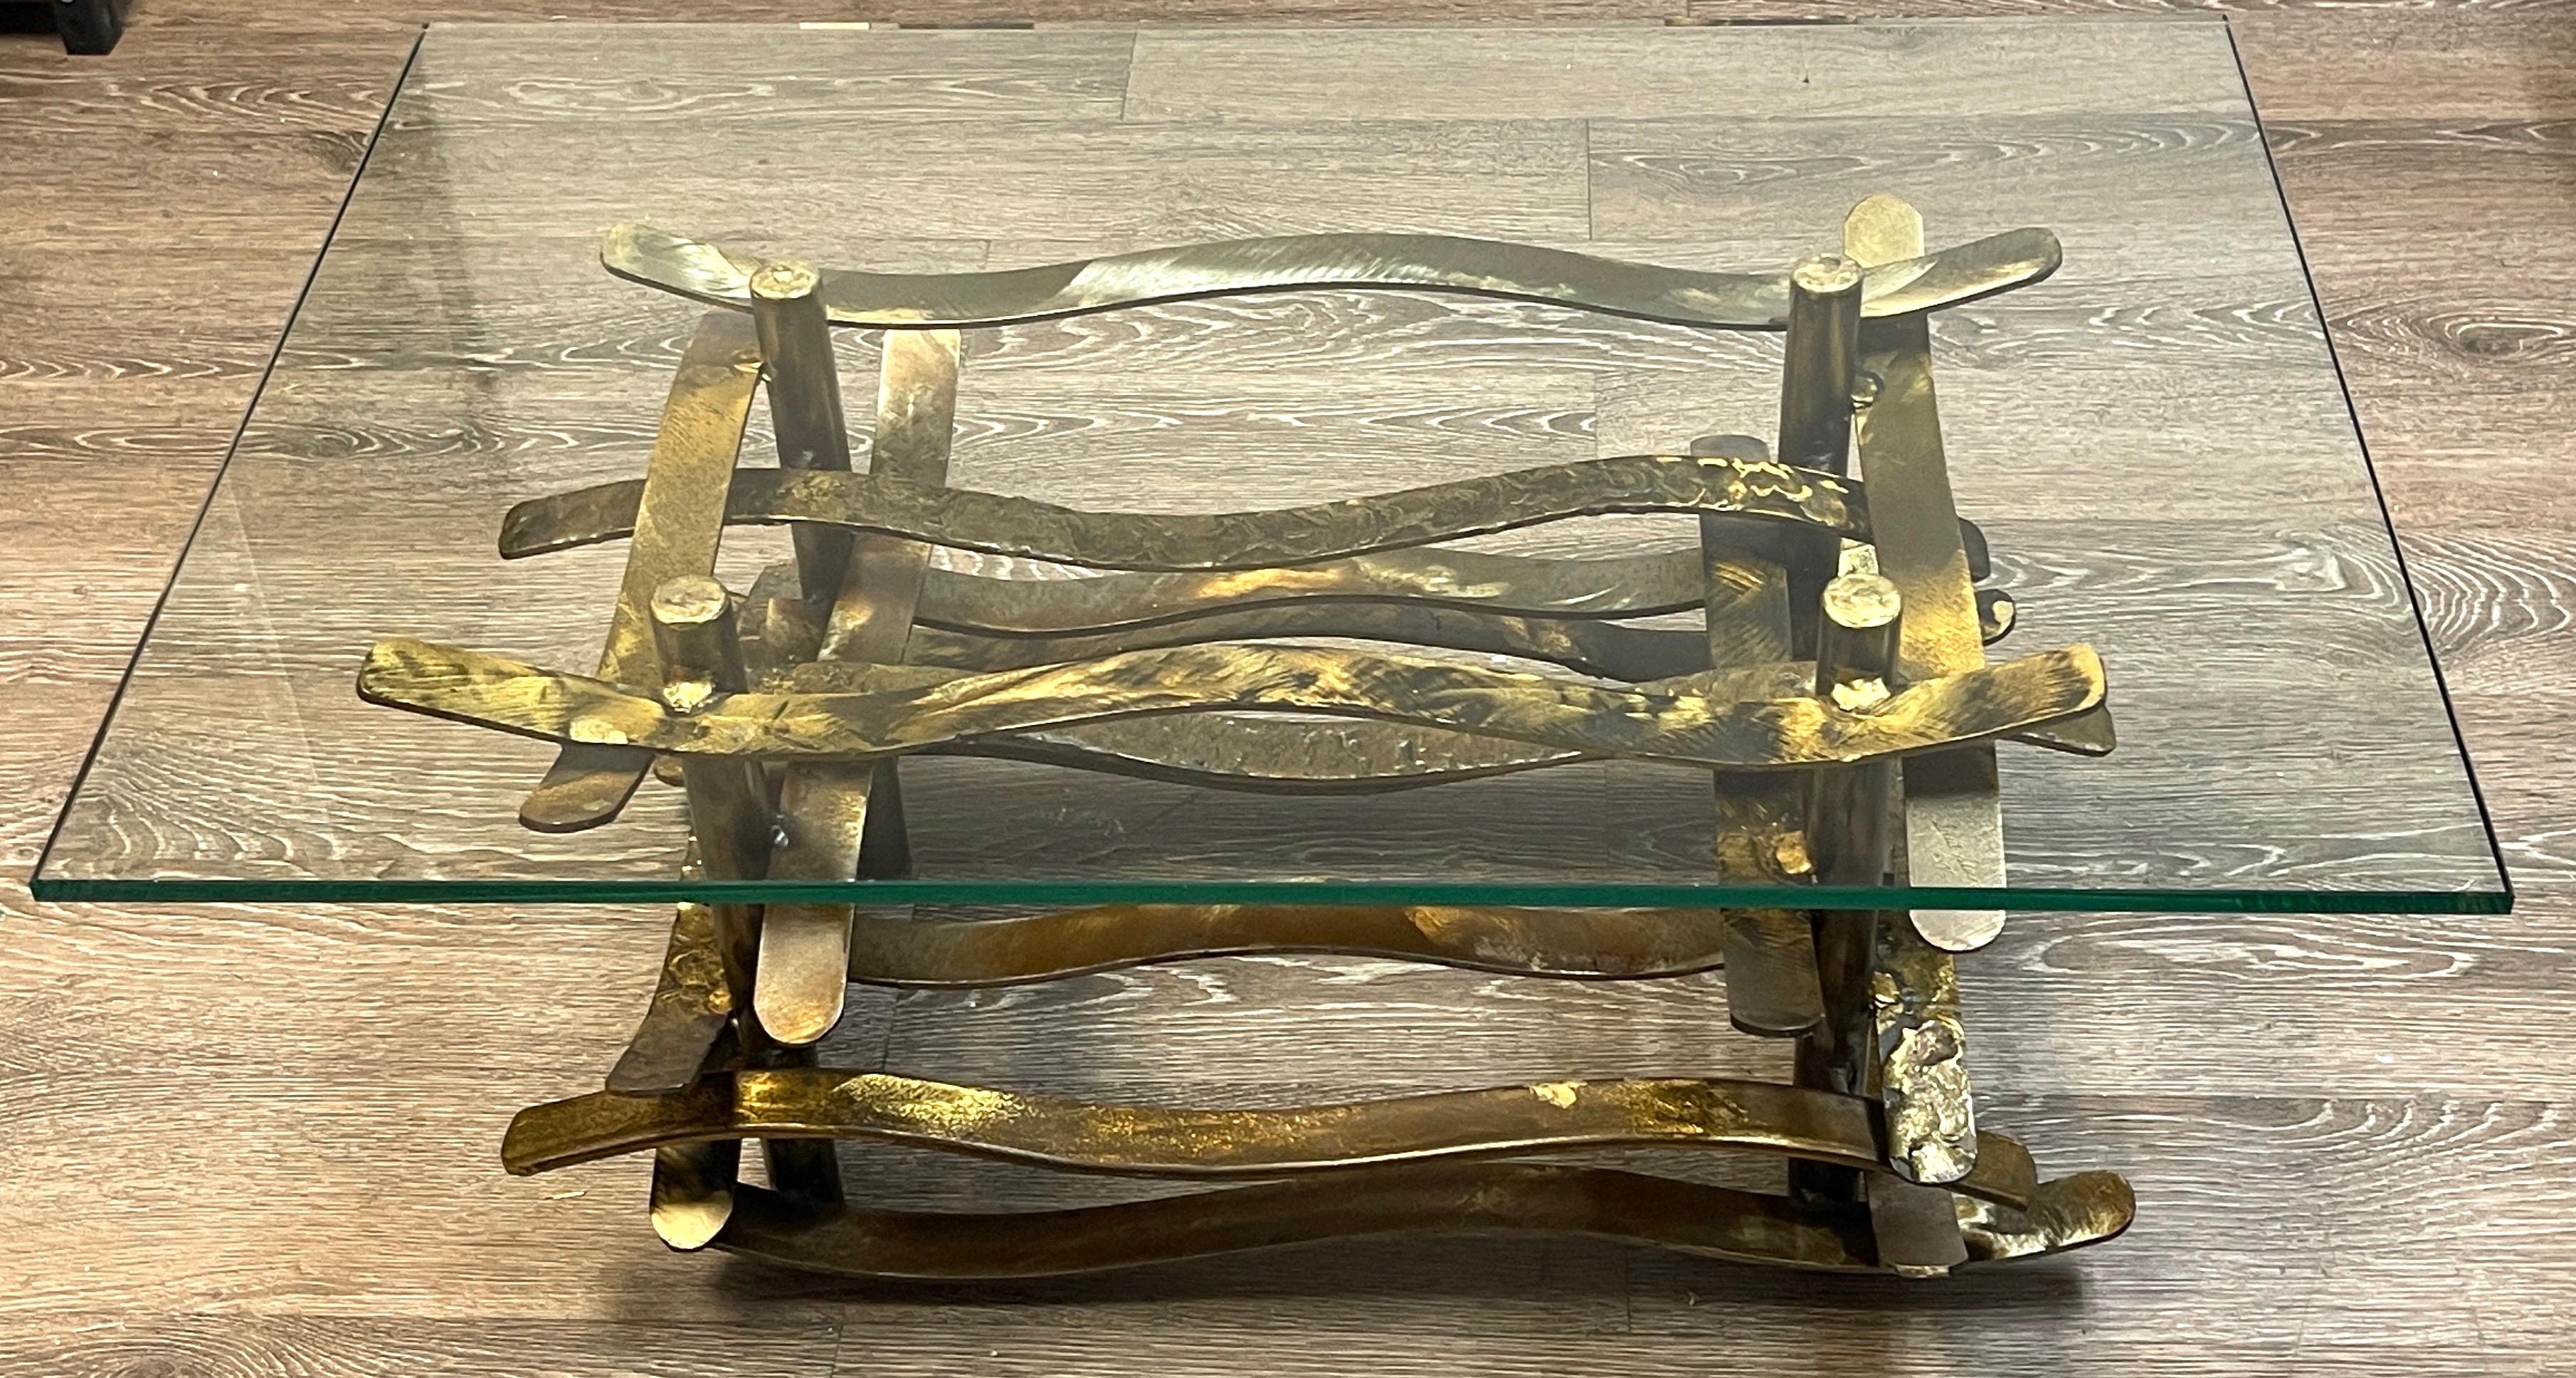 Patinated Bronze 'Ribbon' coffee table by Silas Seandel, 1978

A fine example of Seandel's fluid and architectural bronze sculptural work.
Signed on an upper 2nd tier corner 'Silas Seandel, Copyright '78' in script.

Shown with a 24-Inch x